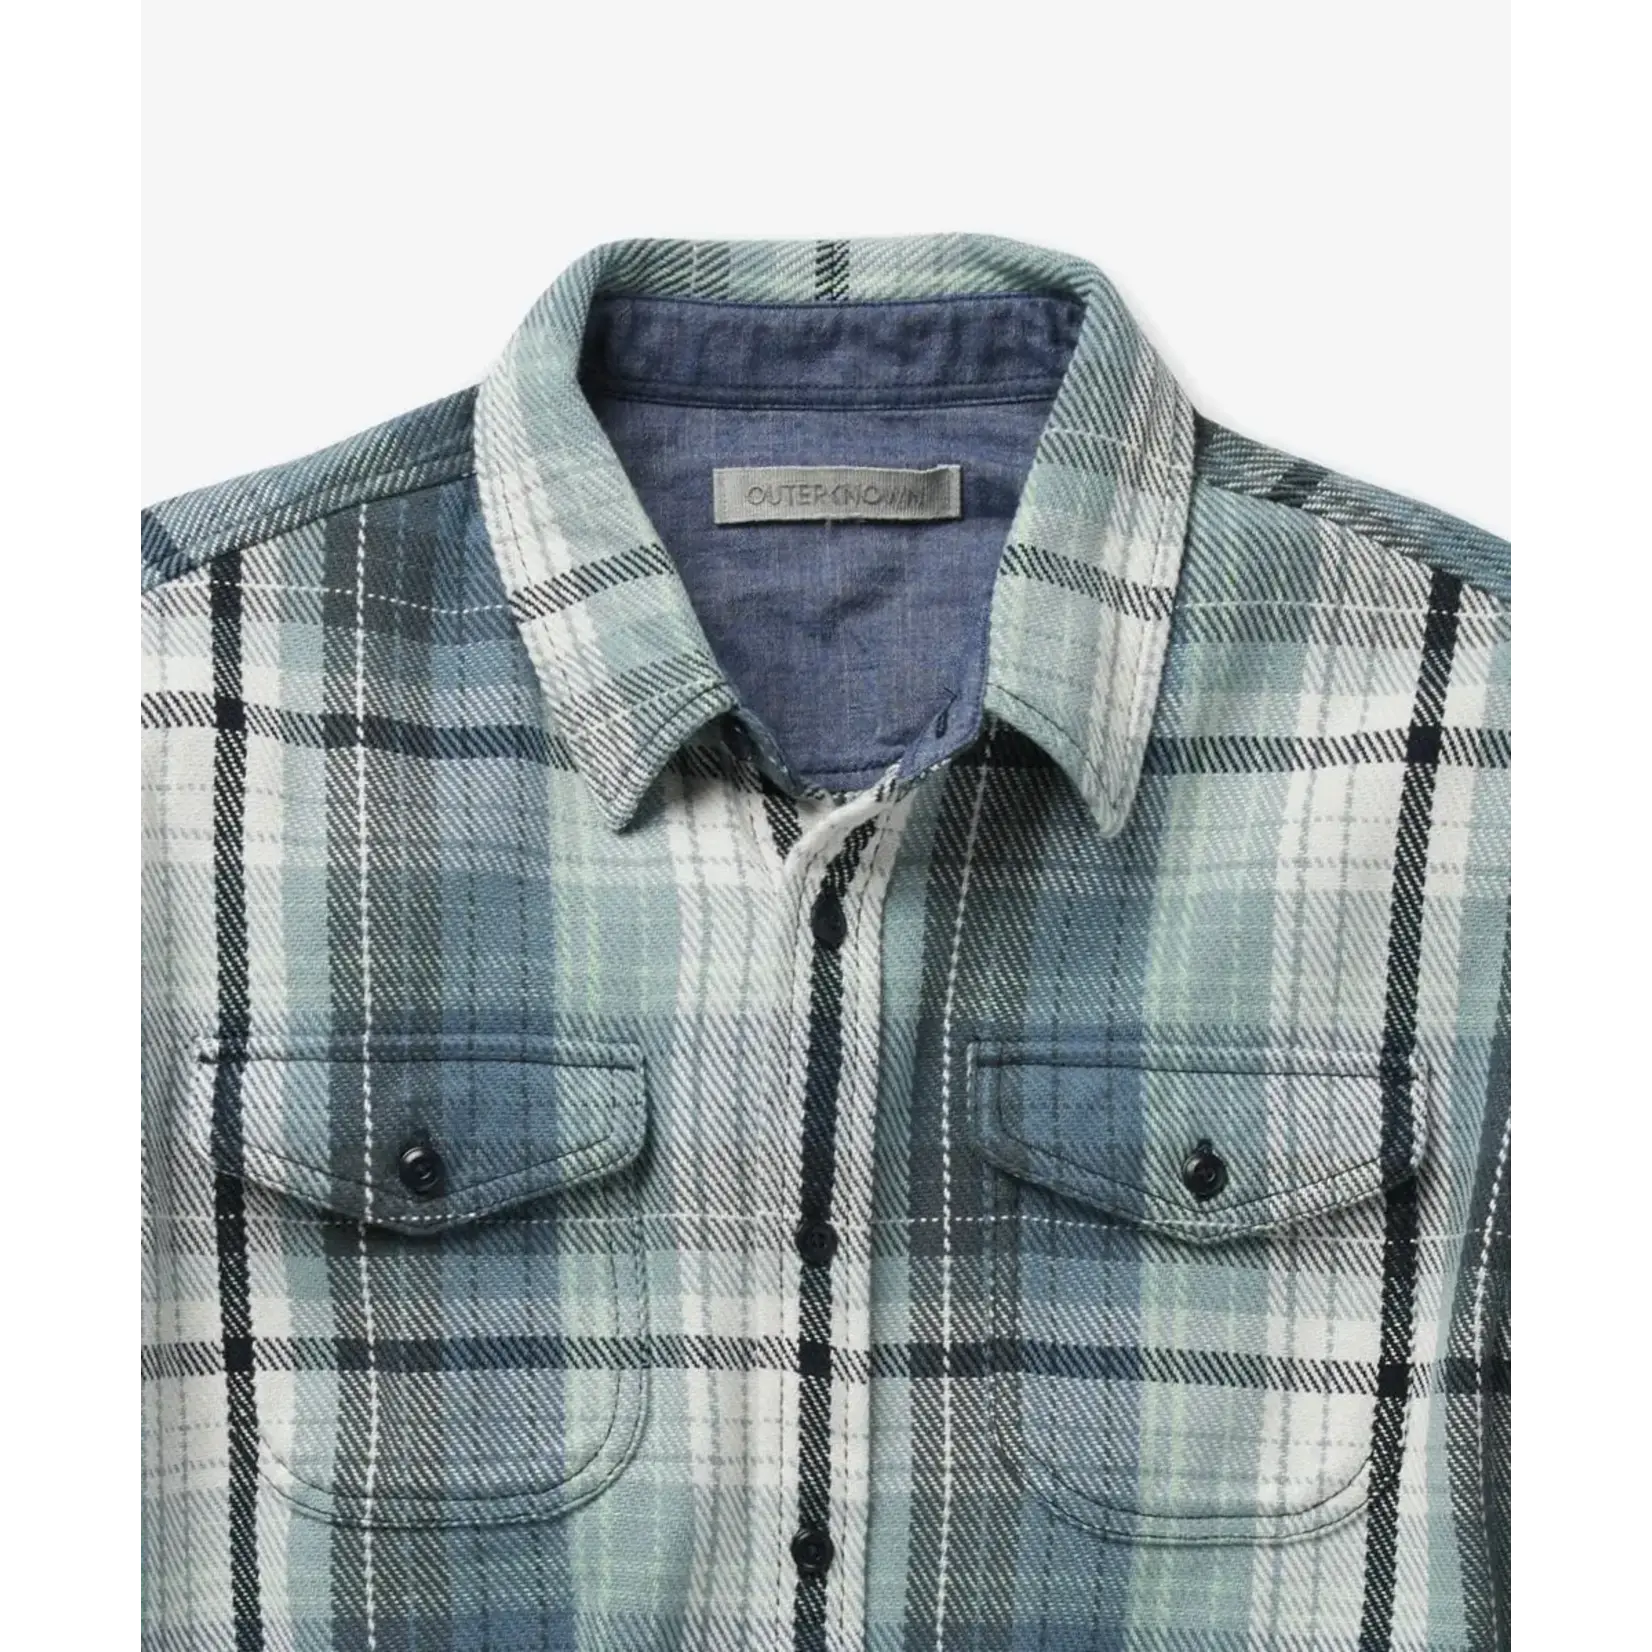 Outer Known Blake Blanket Shirt - Daylight Plaid